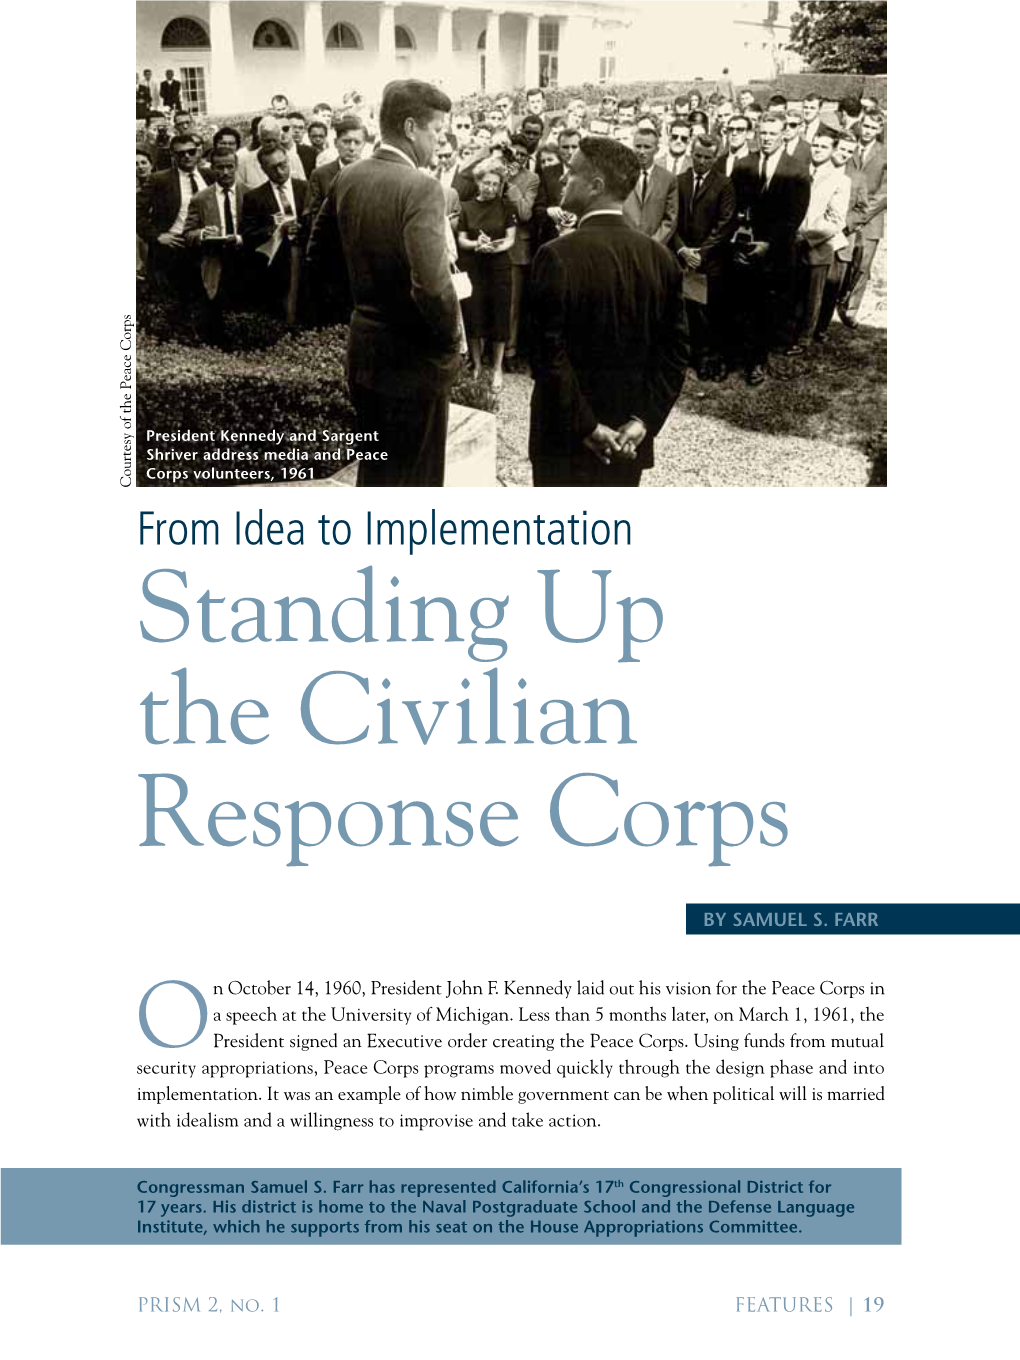 Standing up the Civilian Response Corps